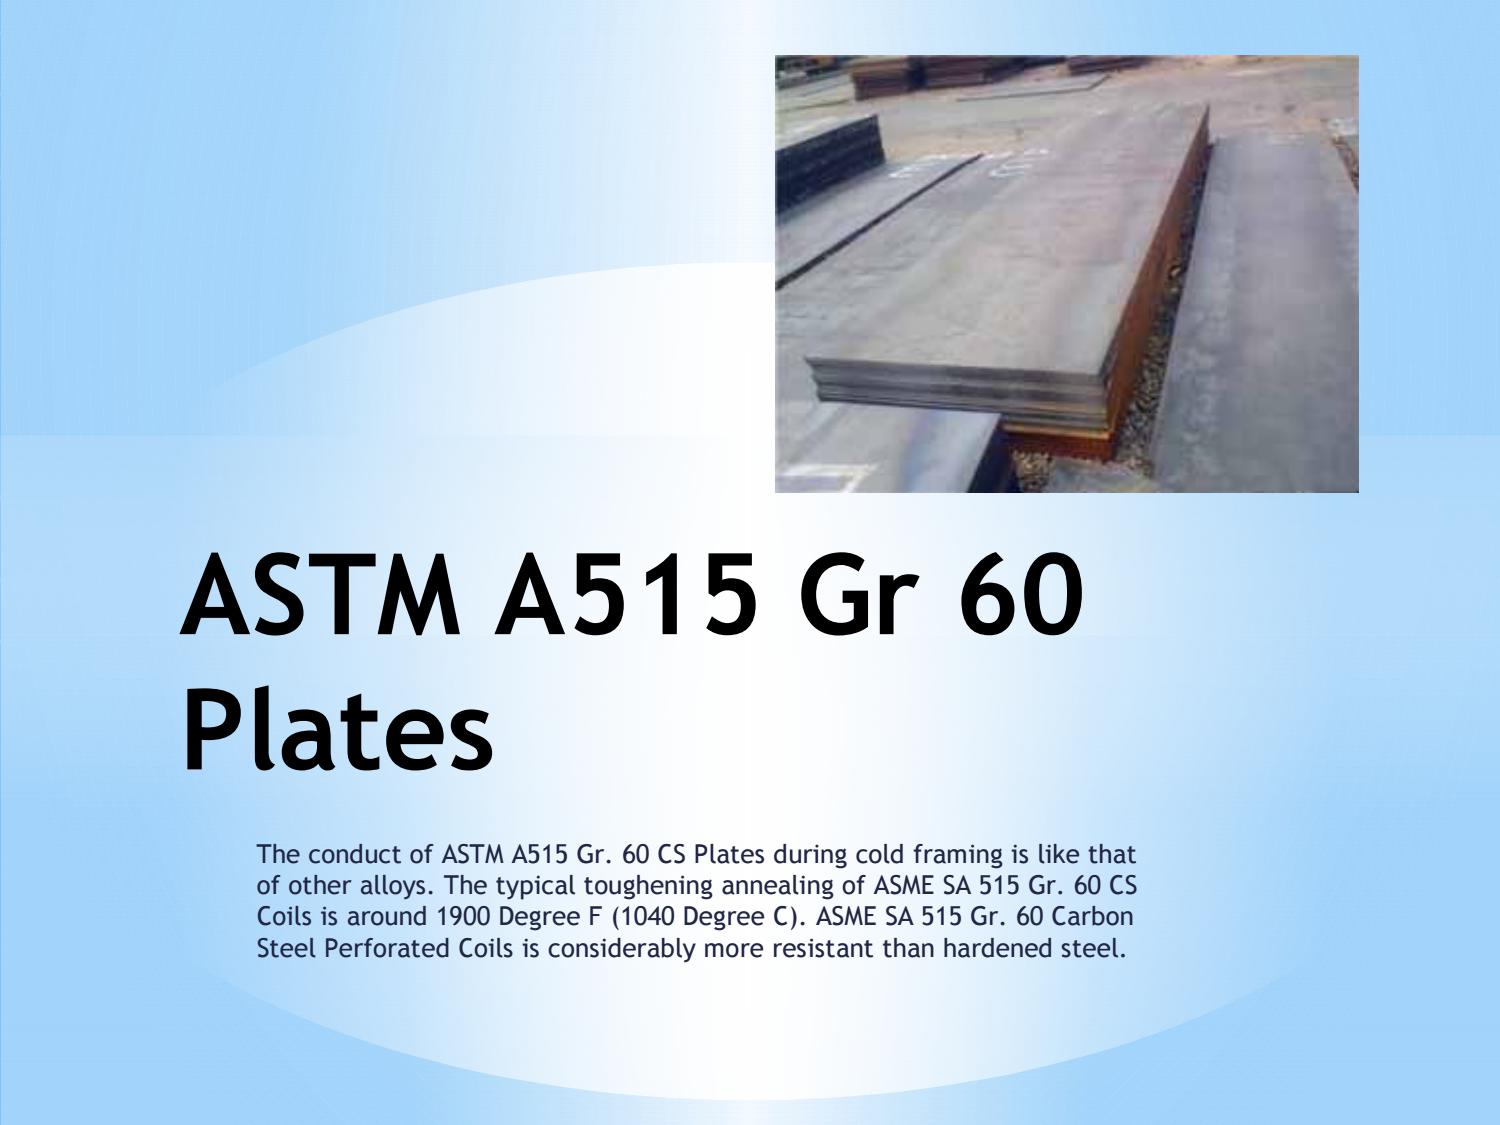 ASTM A515 Gr 60
Plates

The conduct of ASTM A515 Gr. 60 CS Plates during cold framing is like that
of other alloys. The typical toughening annealing of ASME SA 515 Gr. 60 CS
Coils is around 1900 Degree F (1040 Degree C). ASME SA 515 Gr. 60 Carbon
Steel Perforated Coils is considerably more resistant than hardened steel.